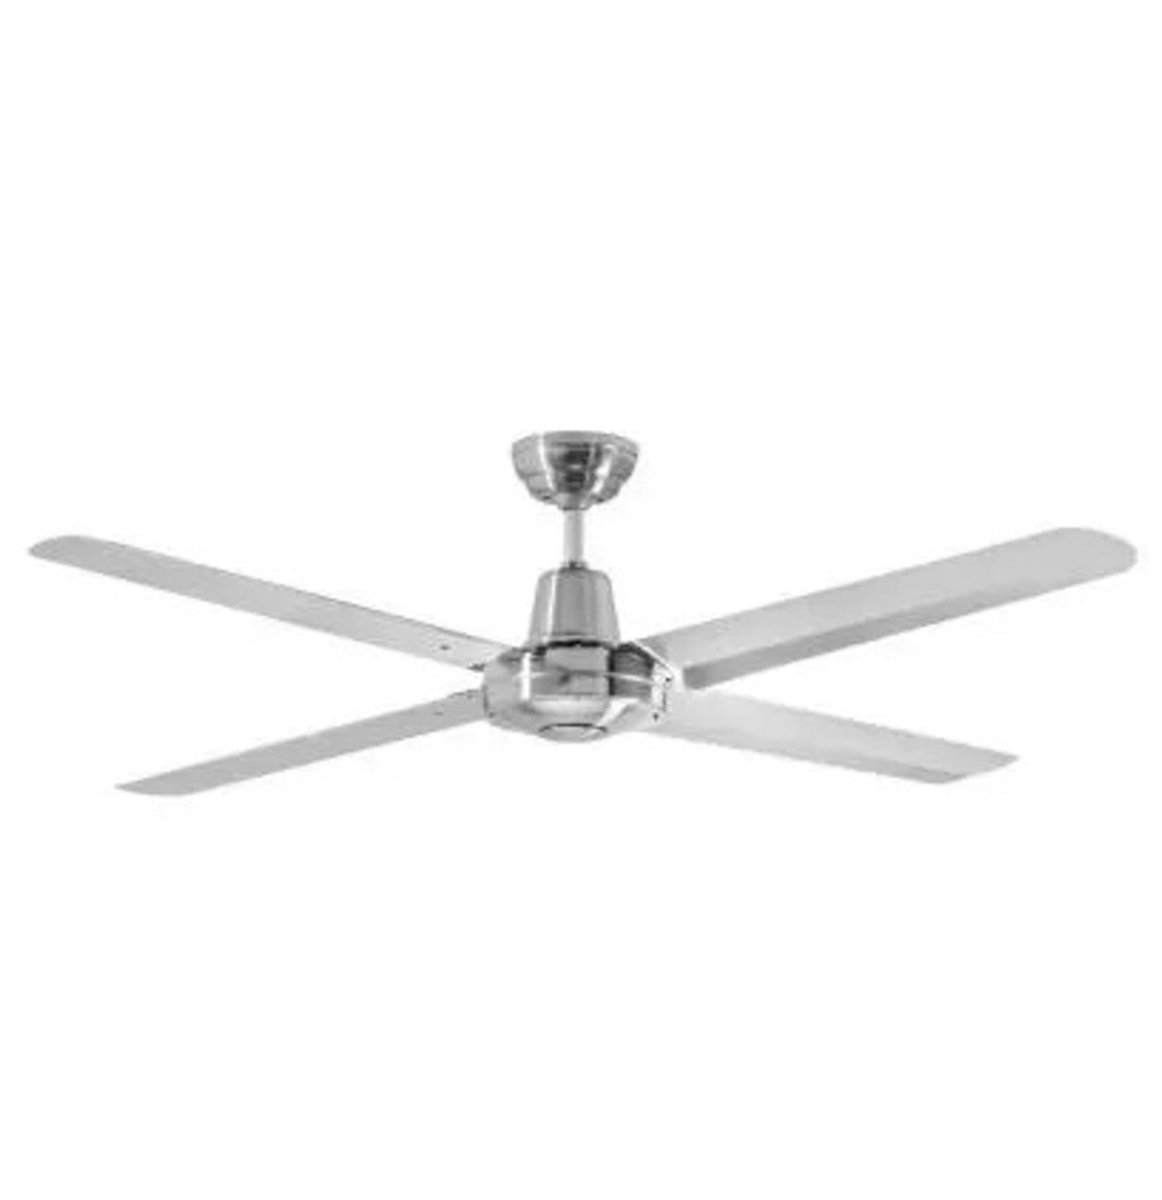 Martec Precision 48" 4 Blade Ceiling Fan Full 316 Stainless Steel - Mases LightingEglo